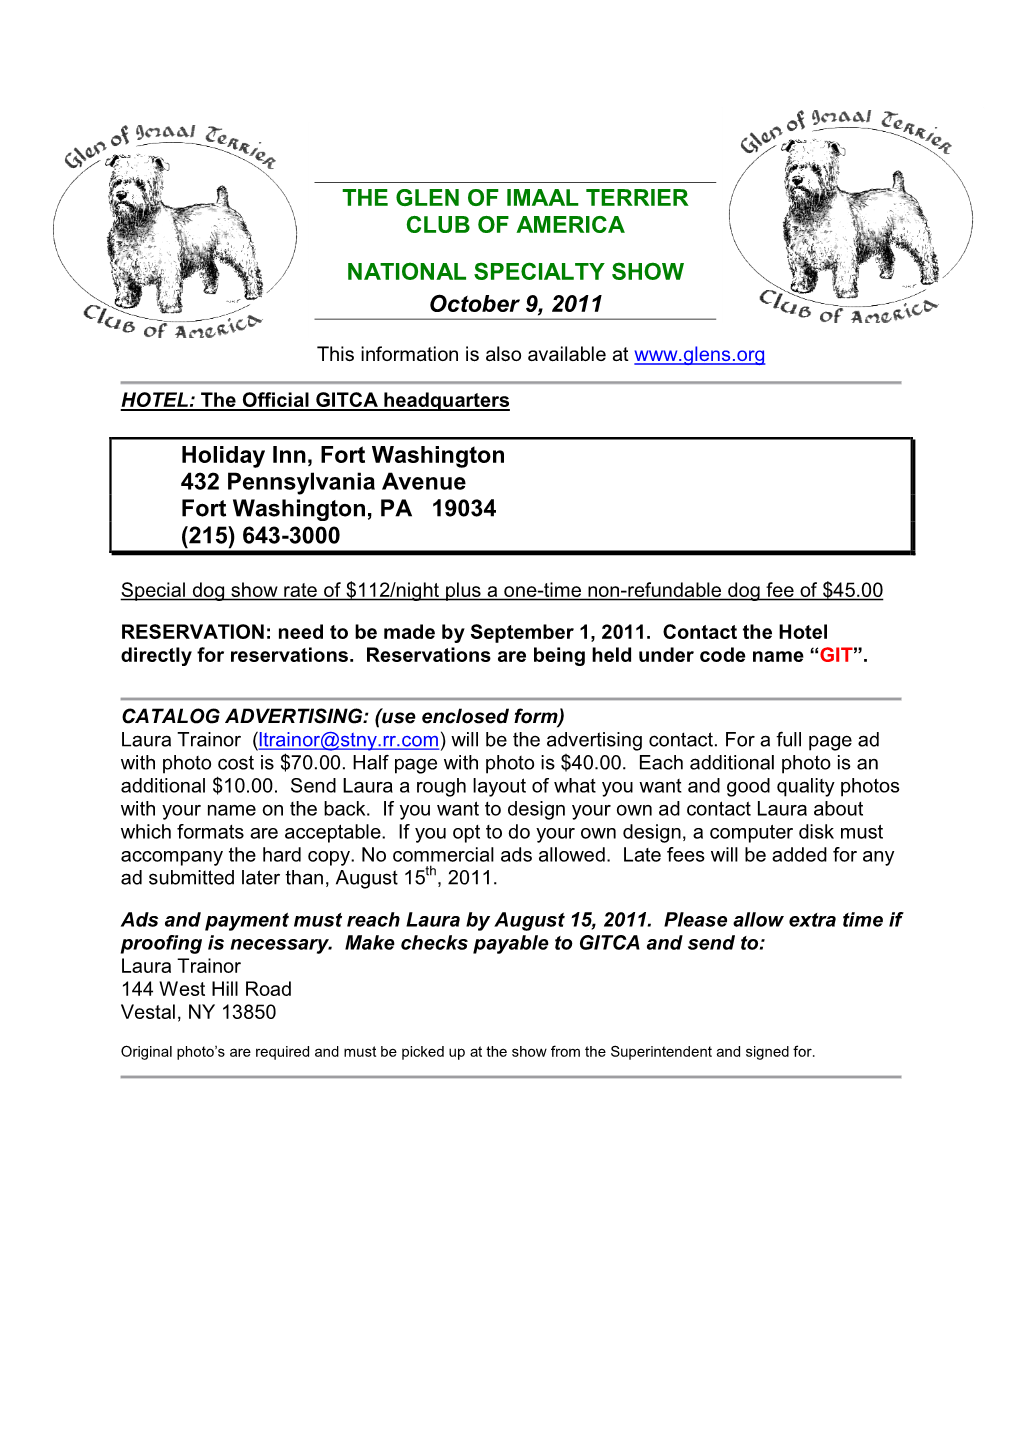 The Glen of Imaal Terrier Club of America National